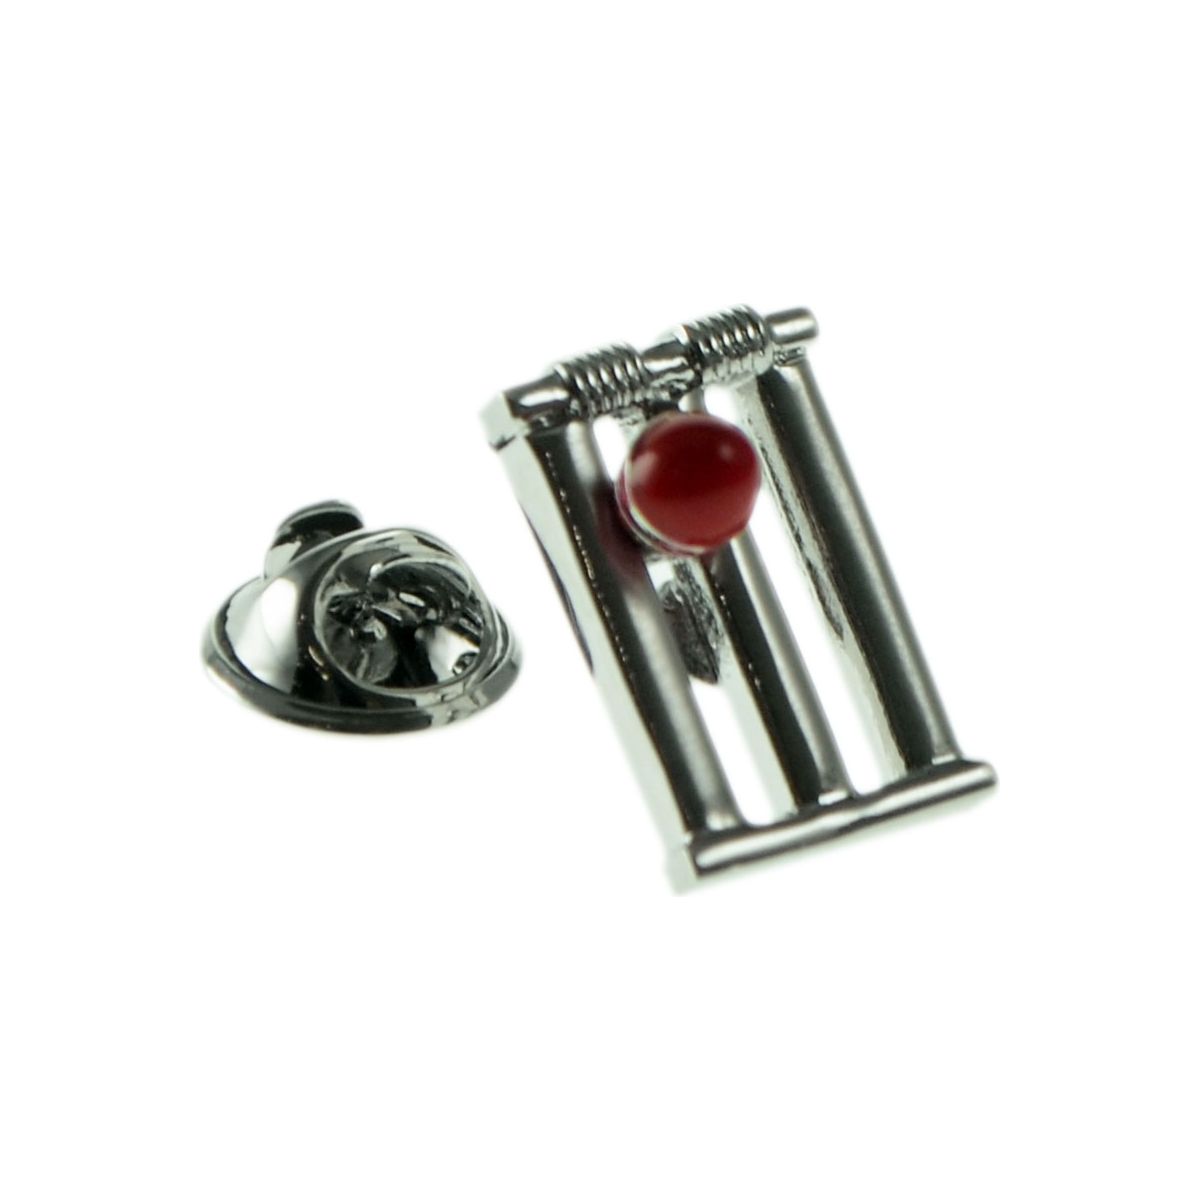 Cricket Wicket & Red Cricket Ball Lapel Pin Badge - Ashton and Finch